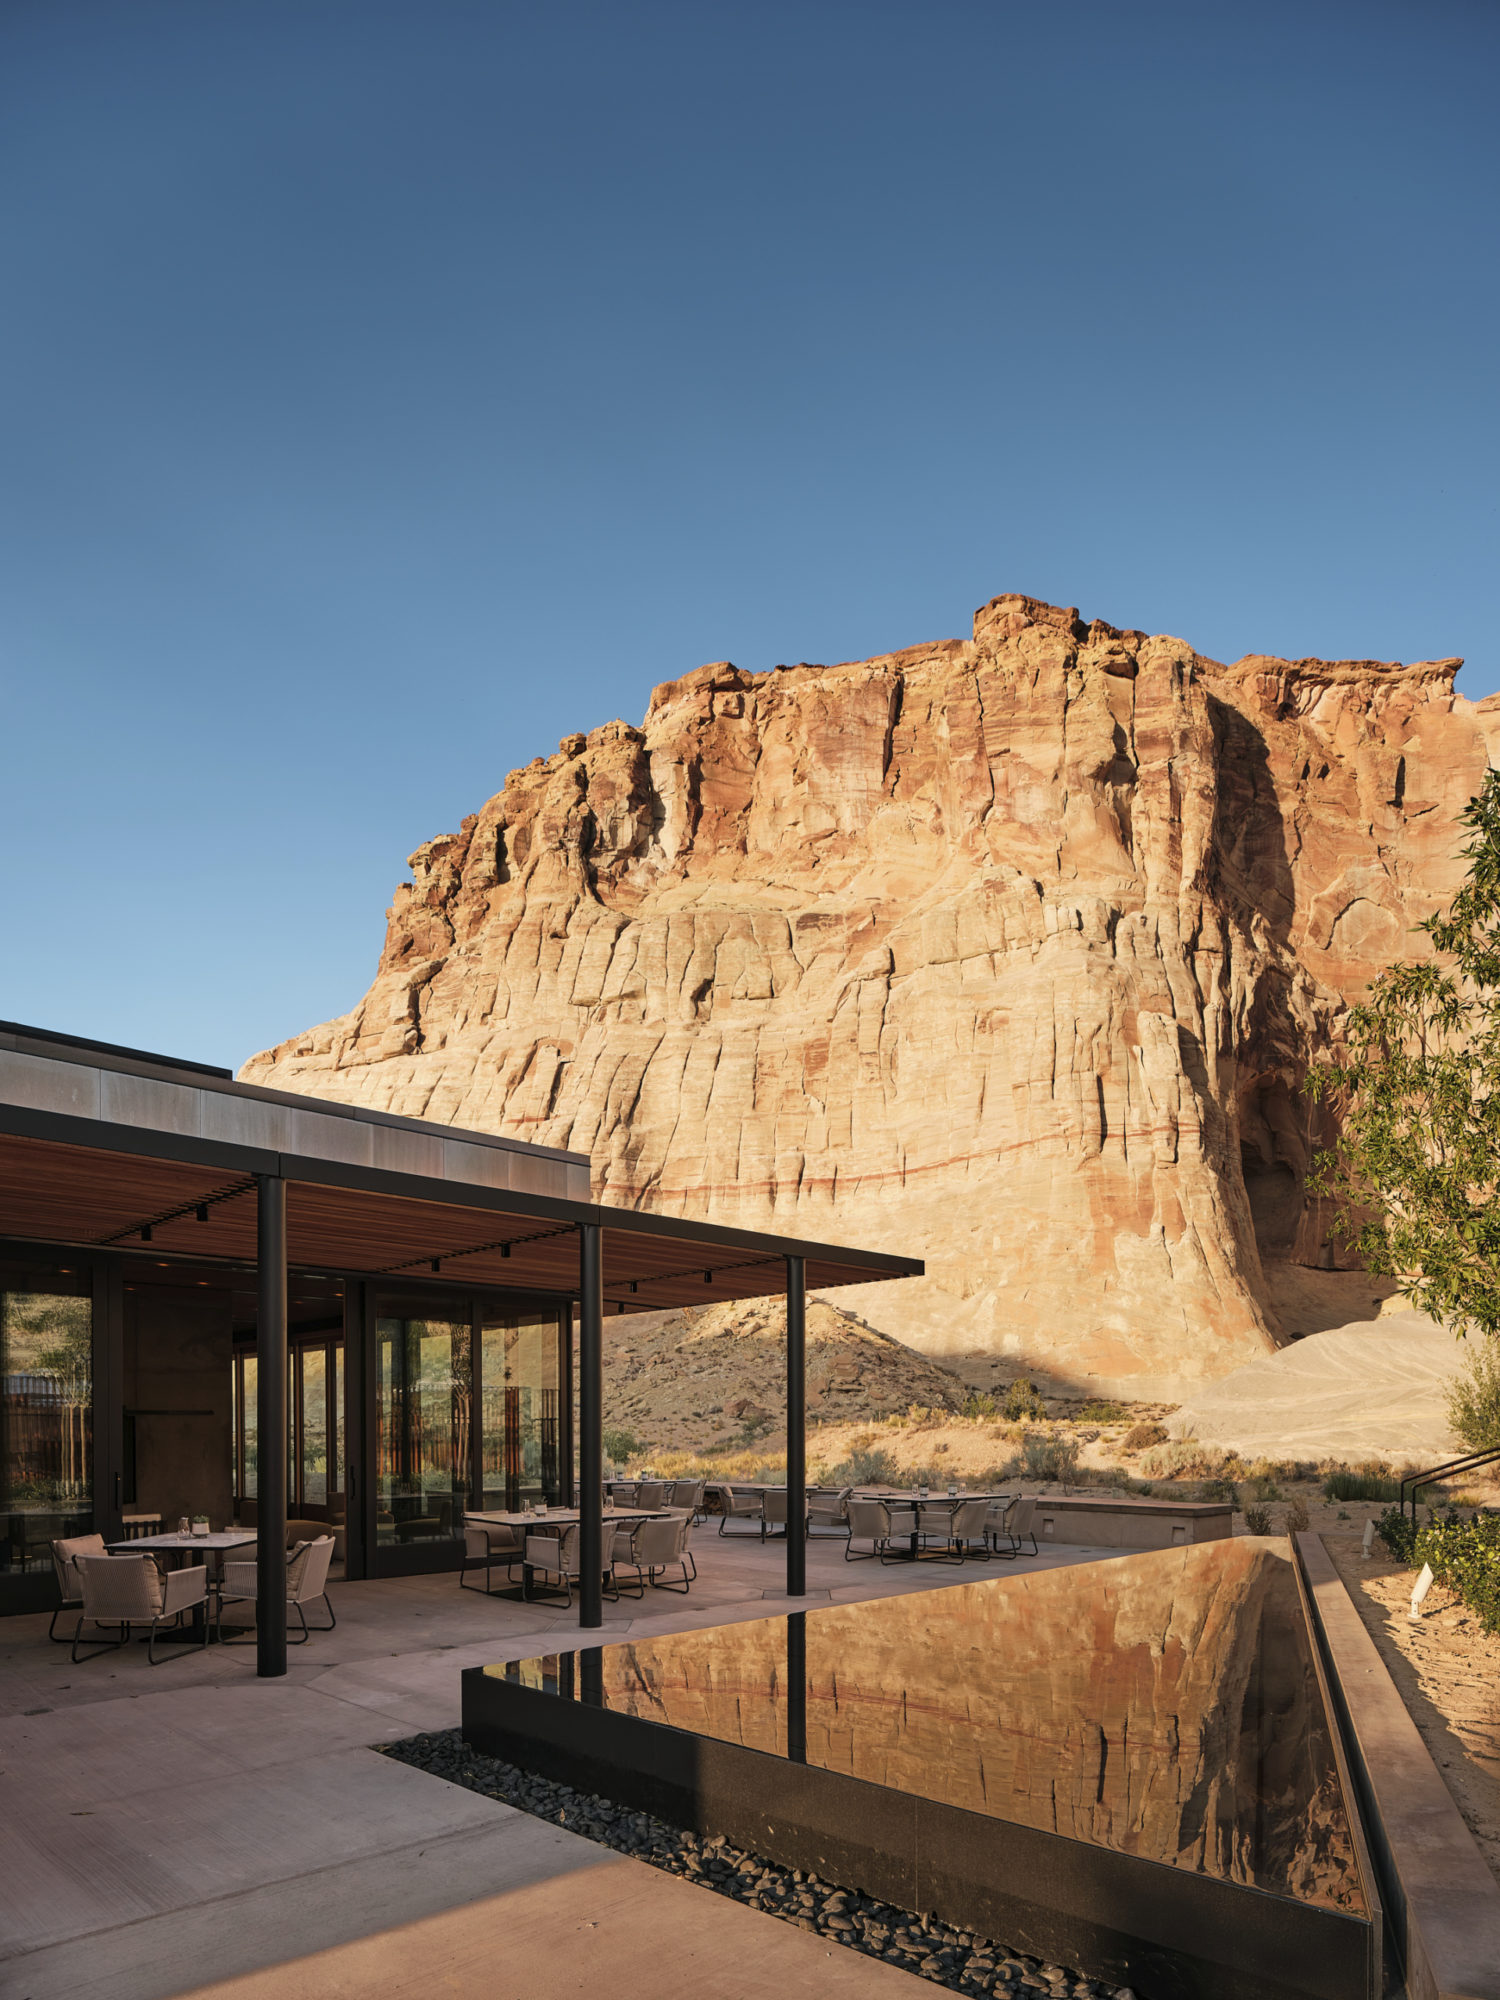 In the June edition of the Founder Series, Homi Vazifdar shares how he co-founded Utah's Amangiri resort.